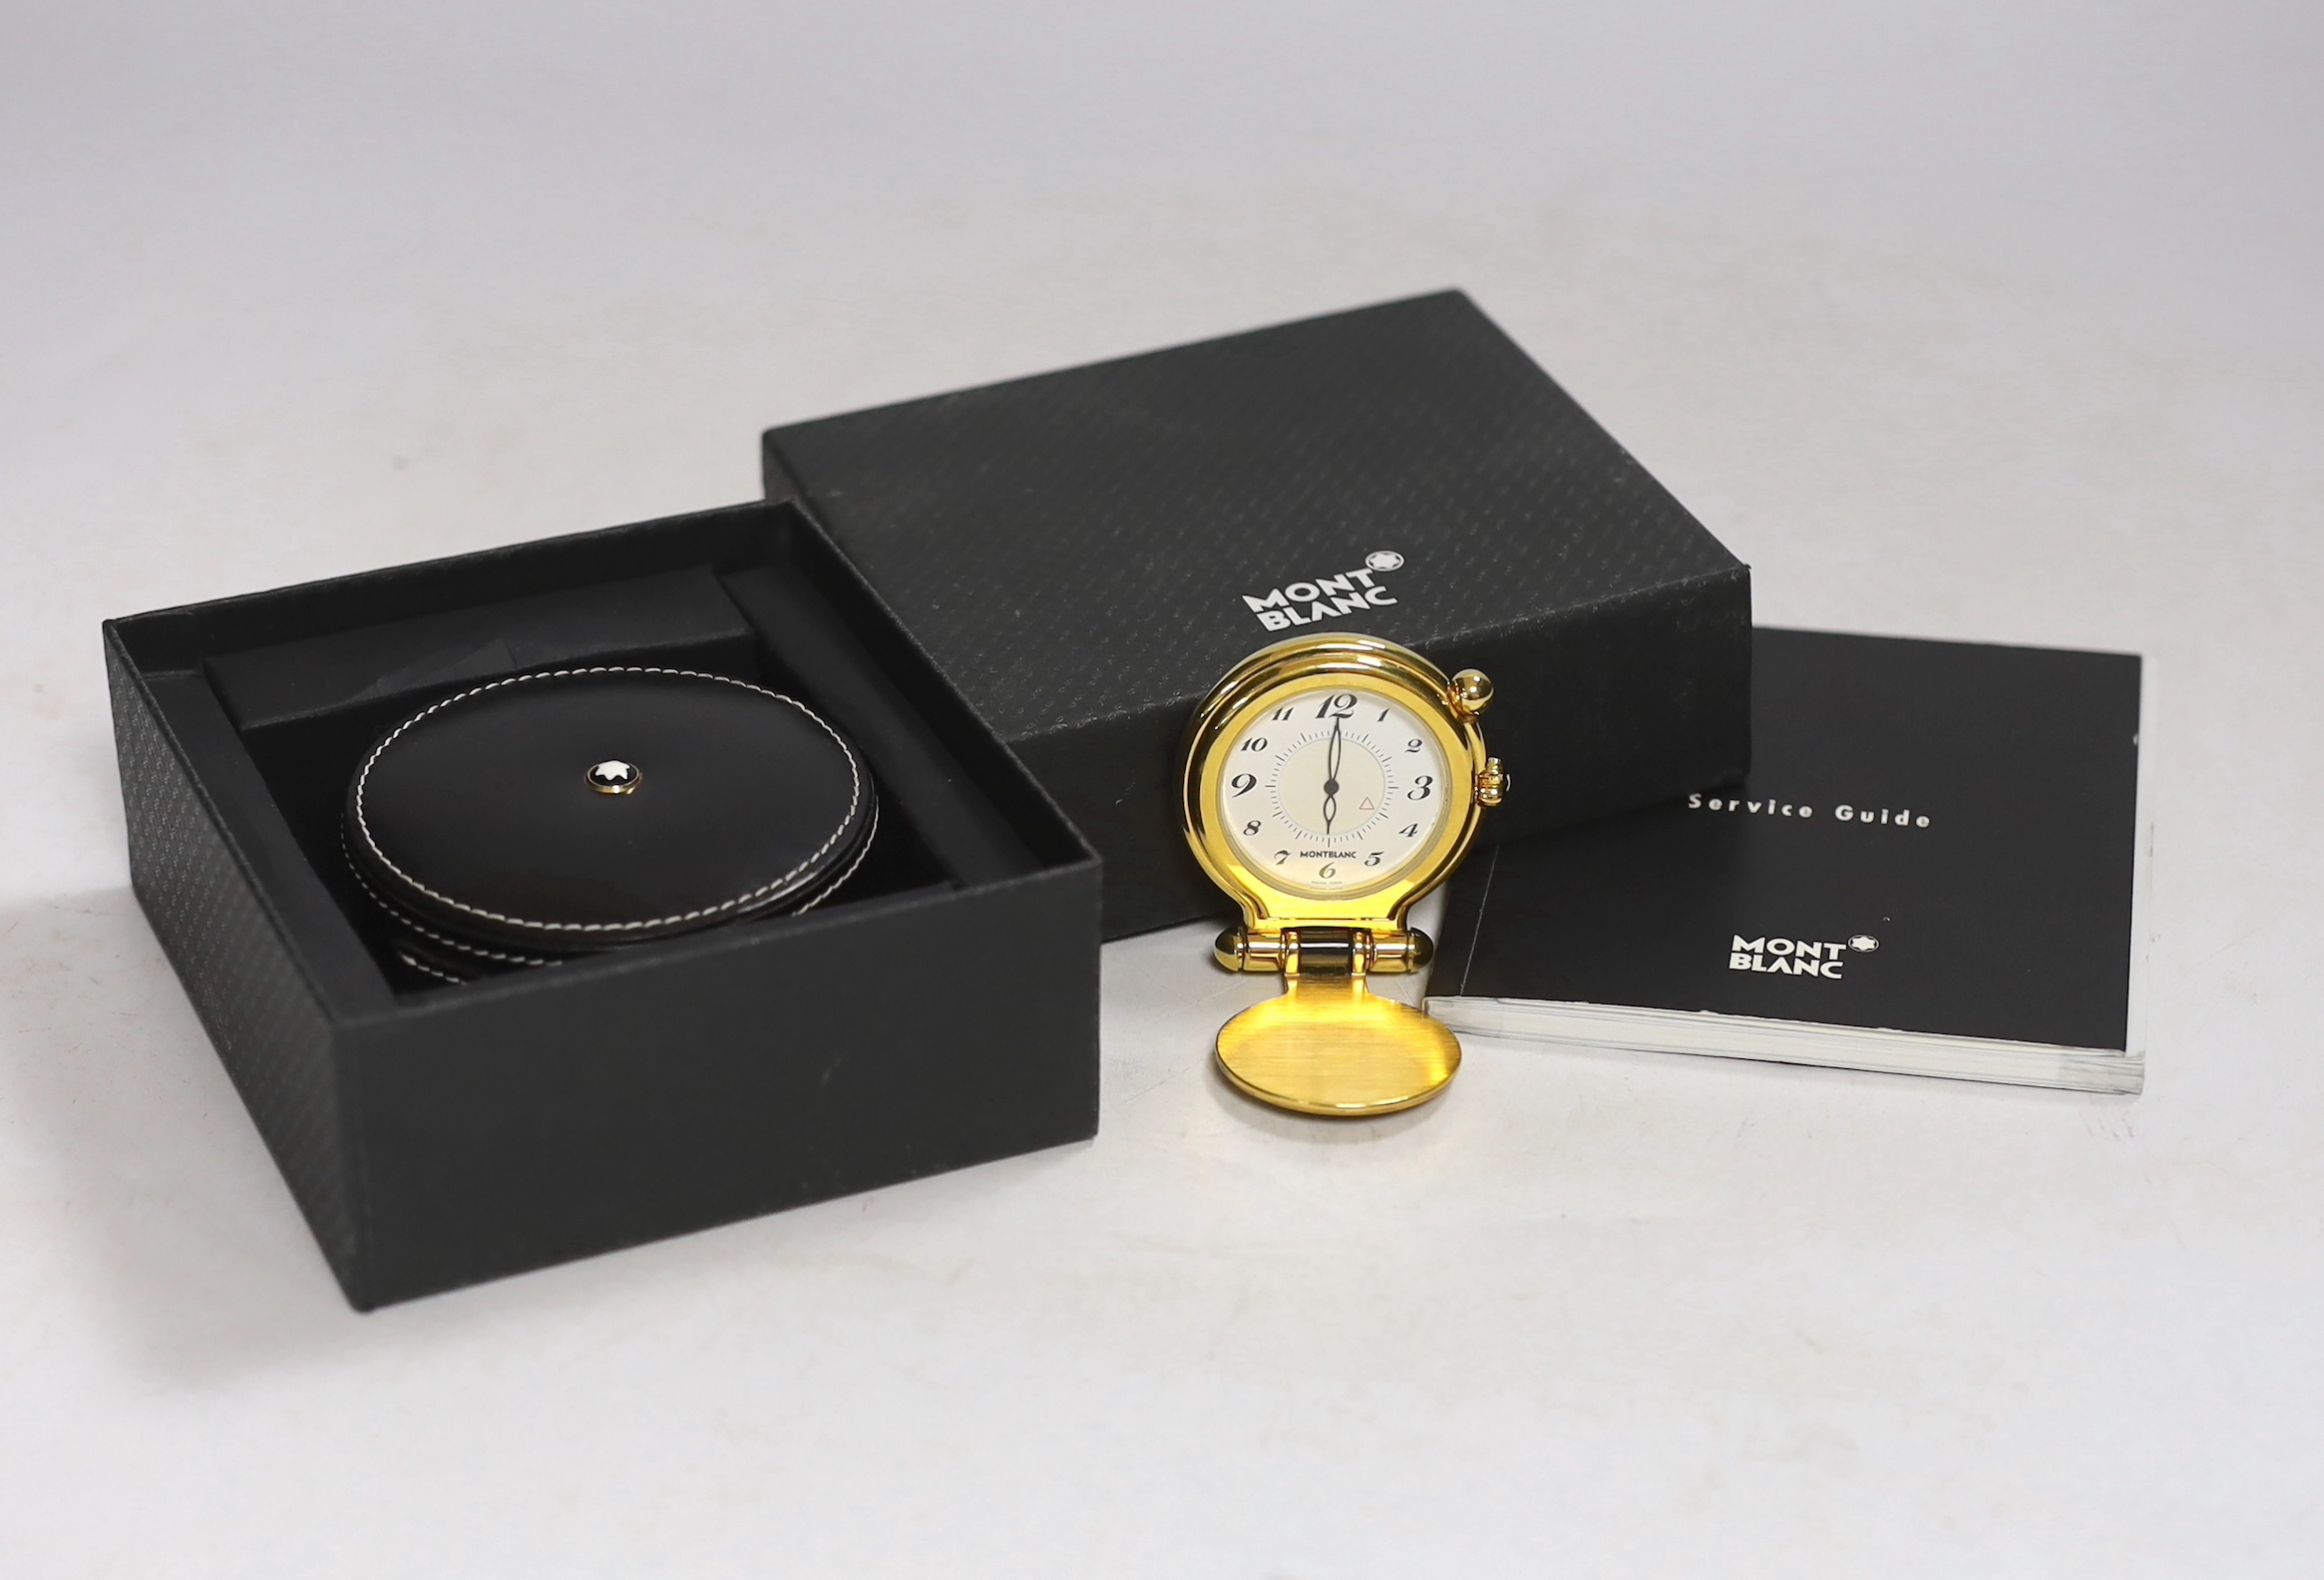 A cased Montblanc travelling timepiece with case and booklet